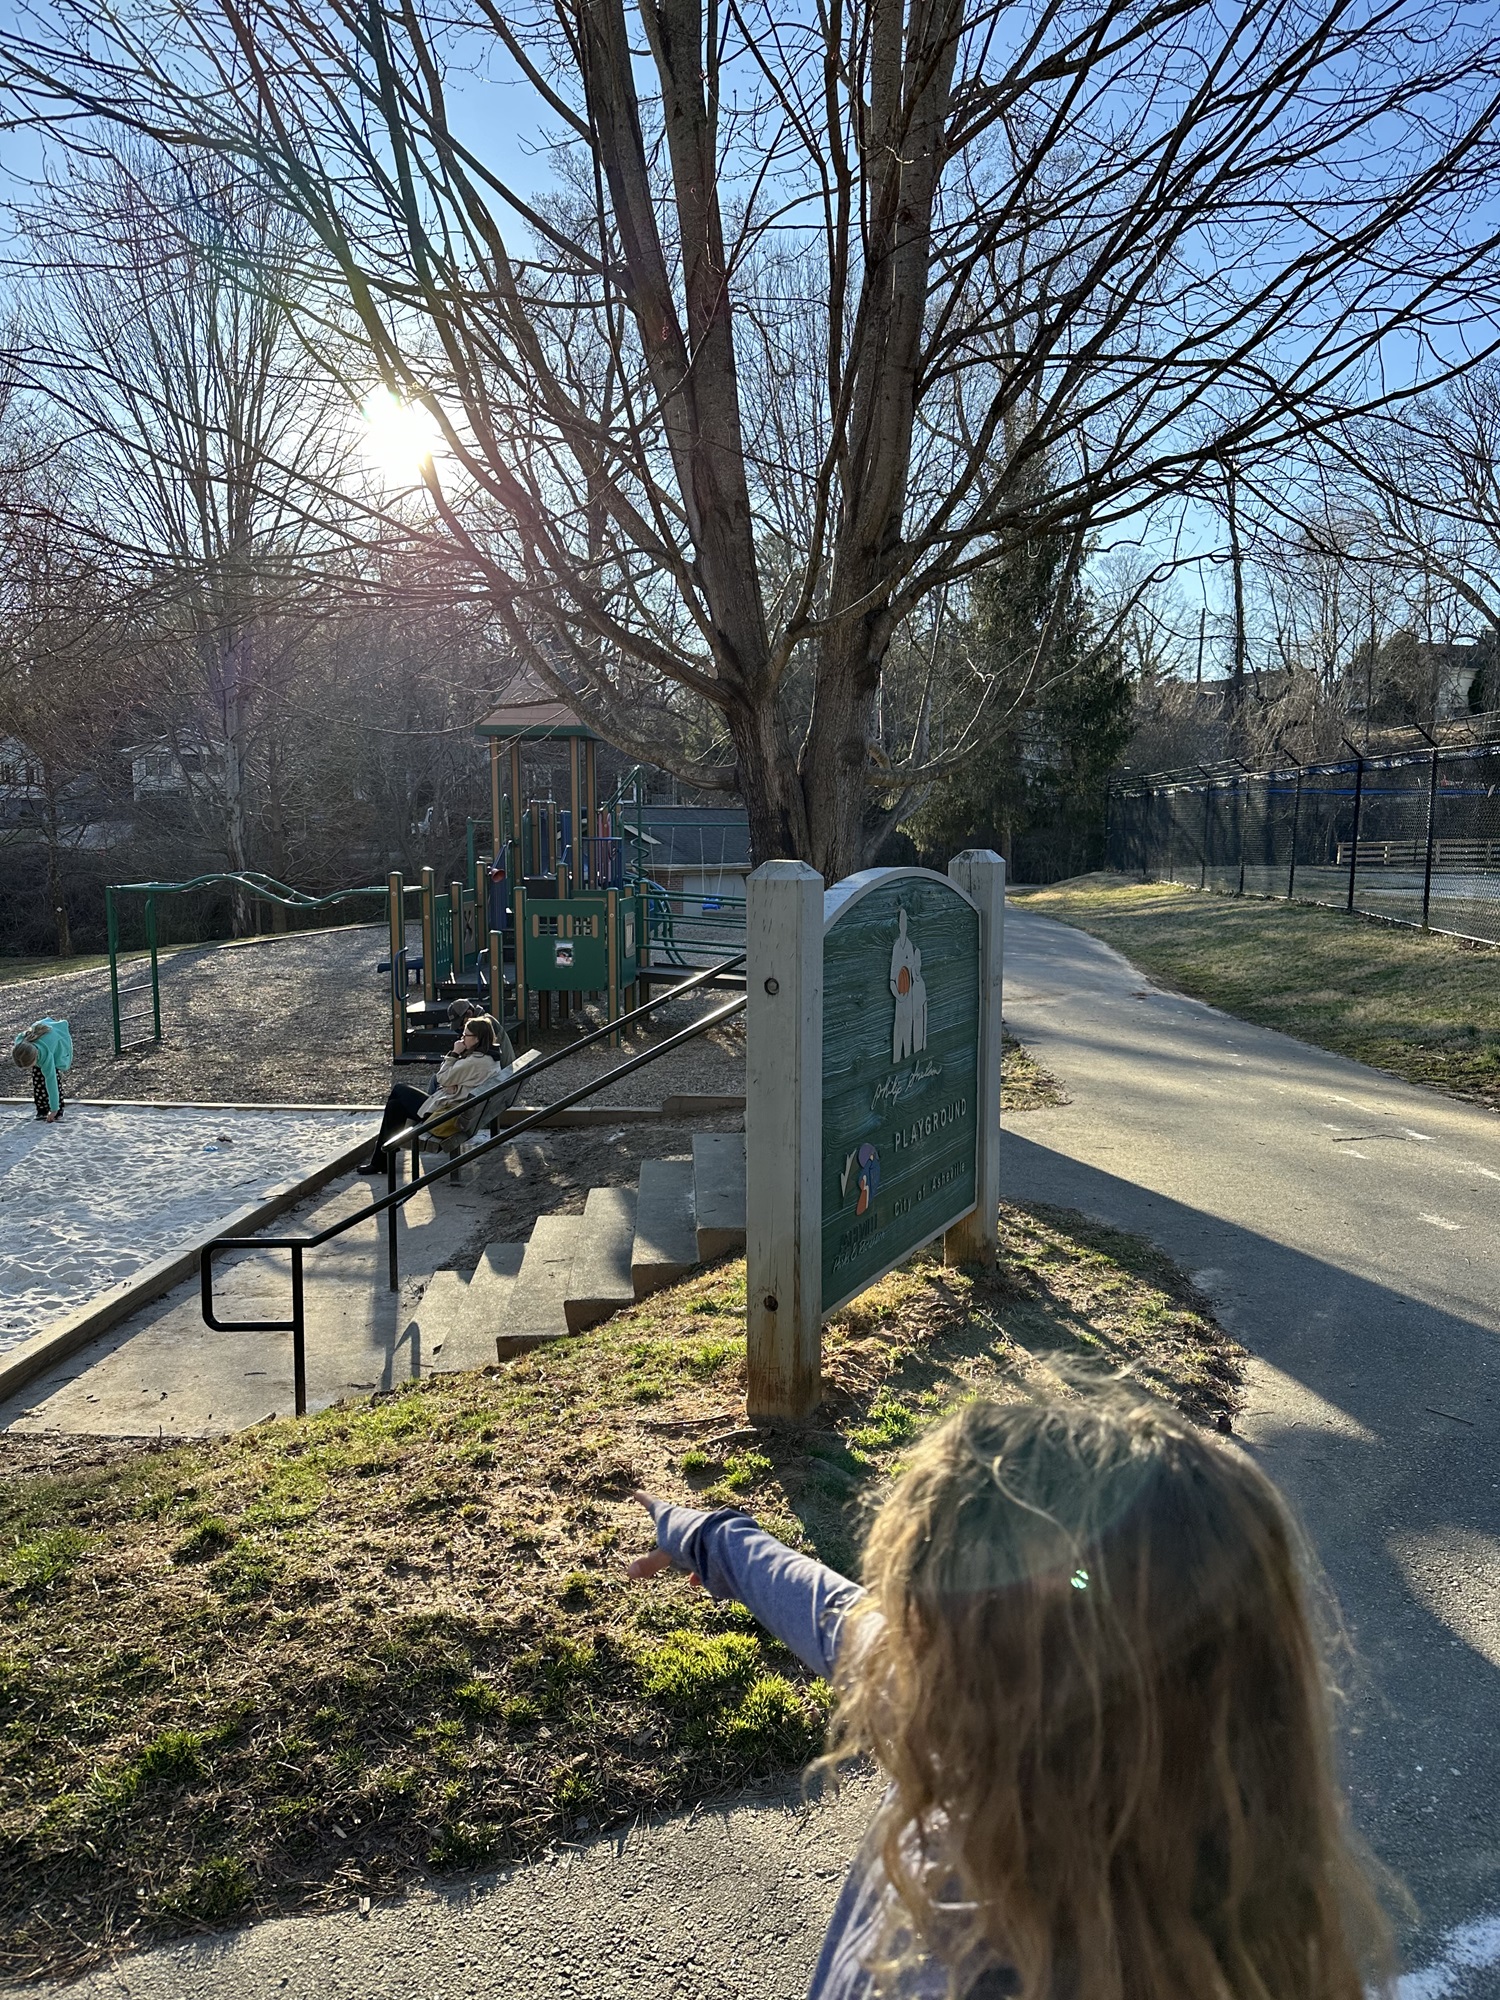 Malvern Hills Park is a gathering spot for families and kids in West Asheville